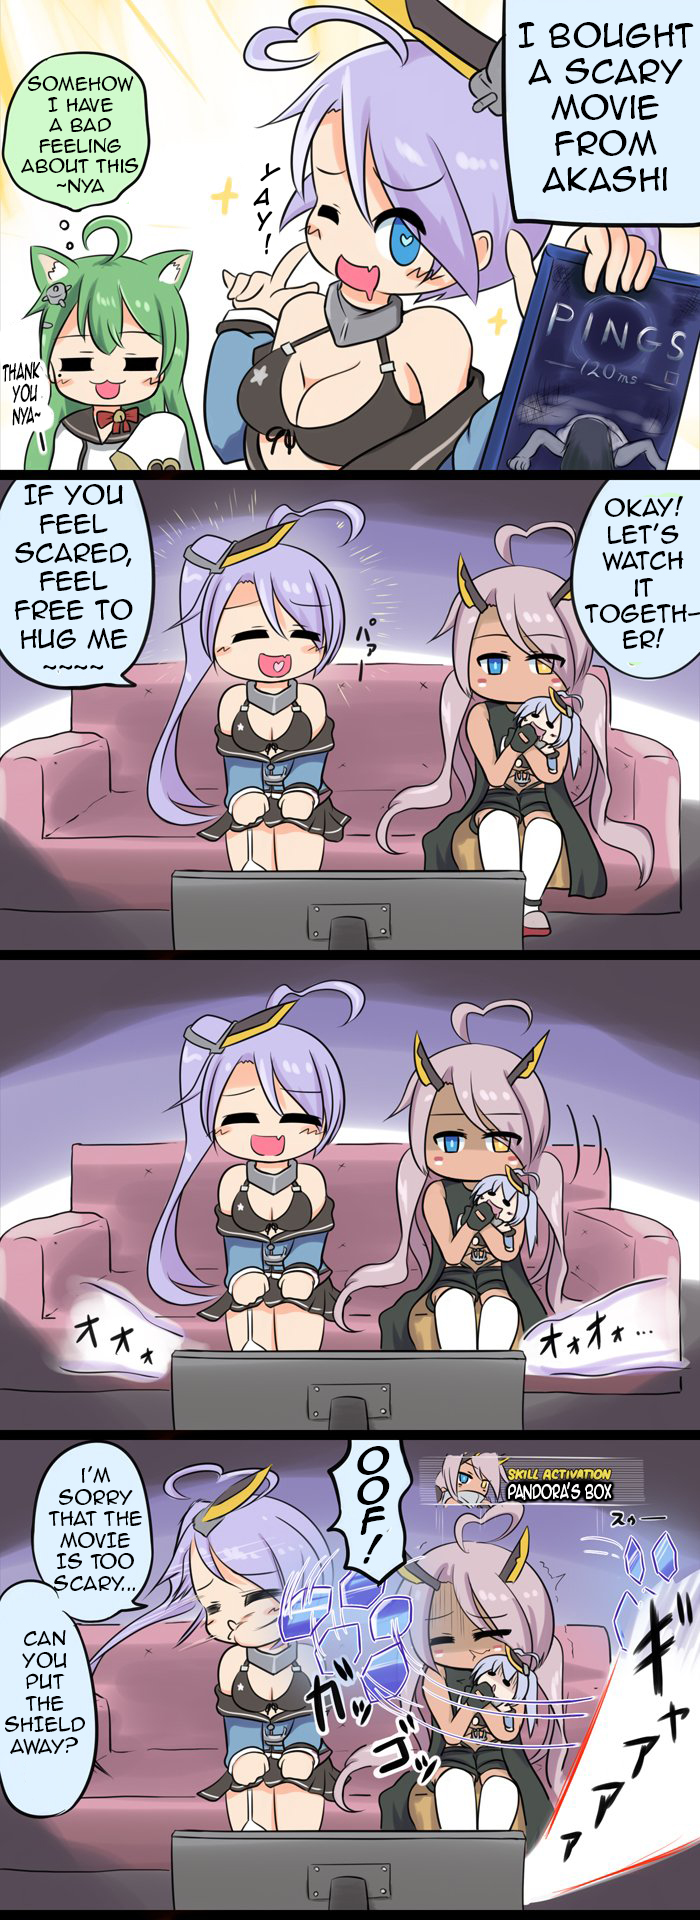 Azur Lane Spare Time (Doujinshi) Ch. 2 Portland Sisters Deepening Bonds By Watching Horror Movie